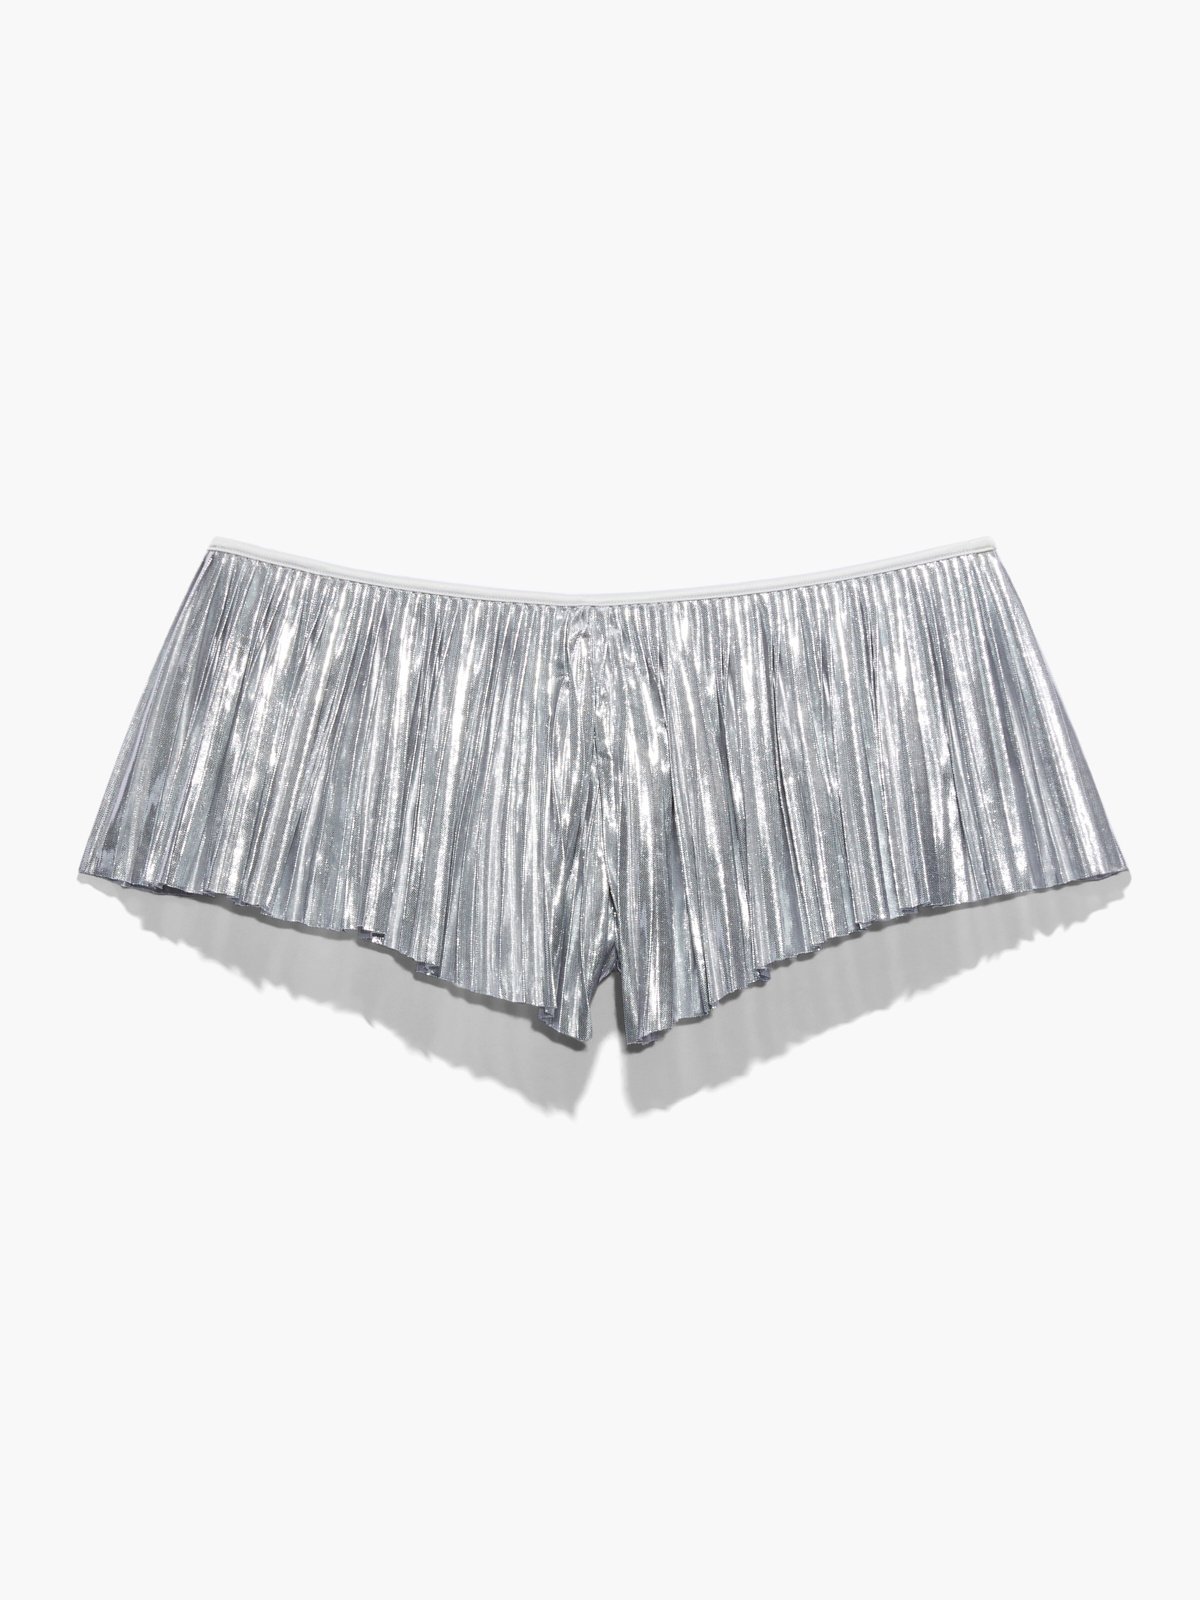 Pleated Lamé Short in Grey & Silver